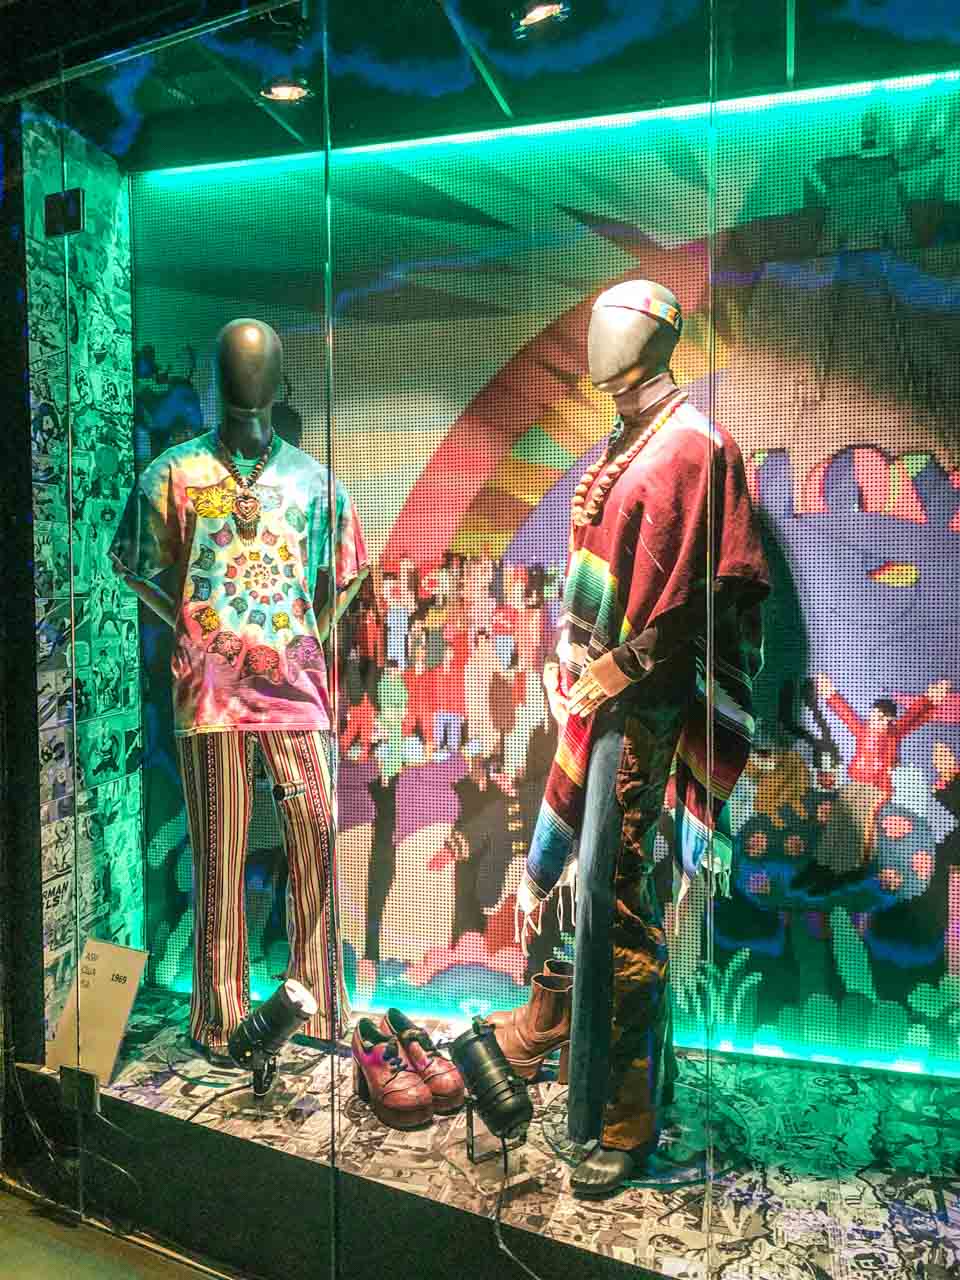 Hippie era clothing on display at the Riga Fashion Museum